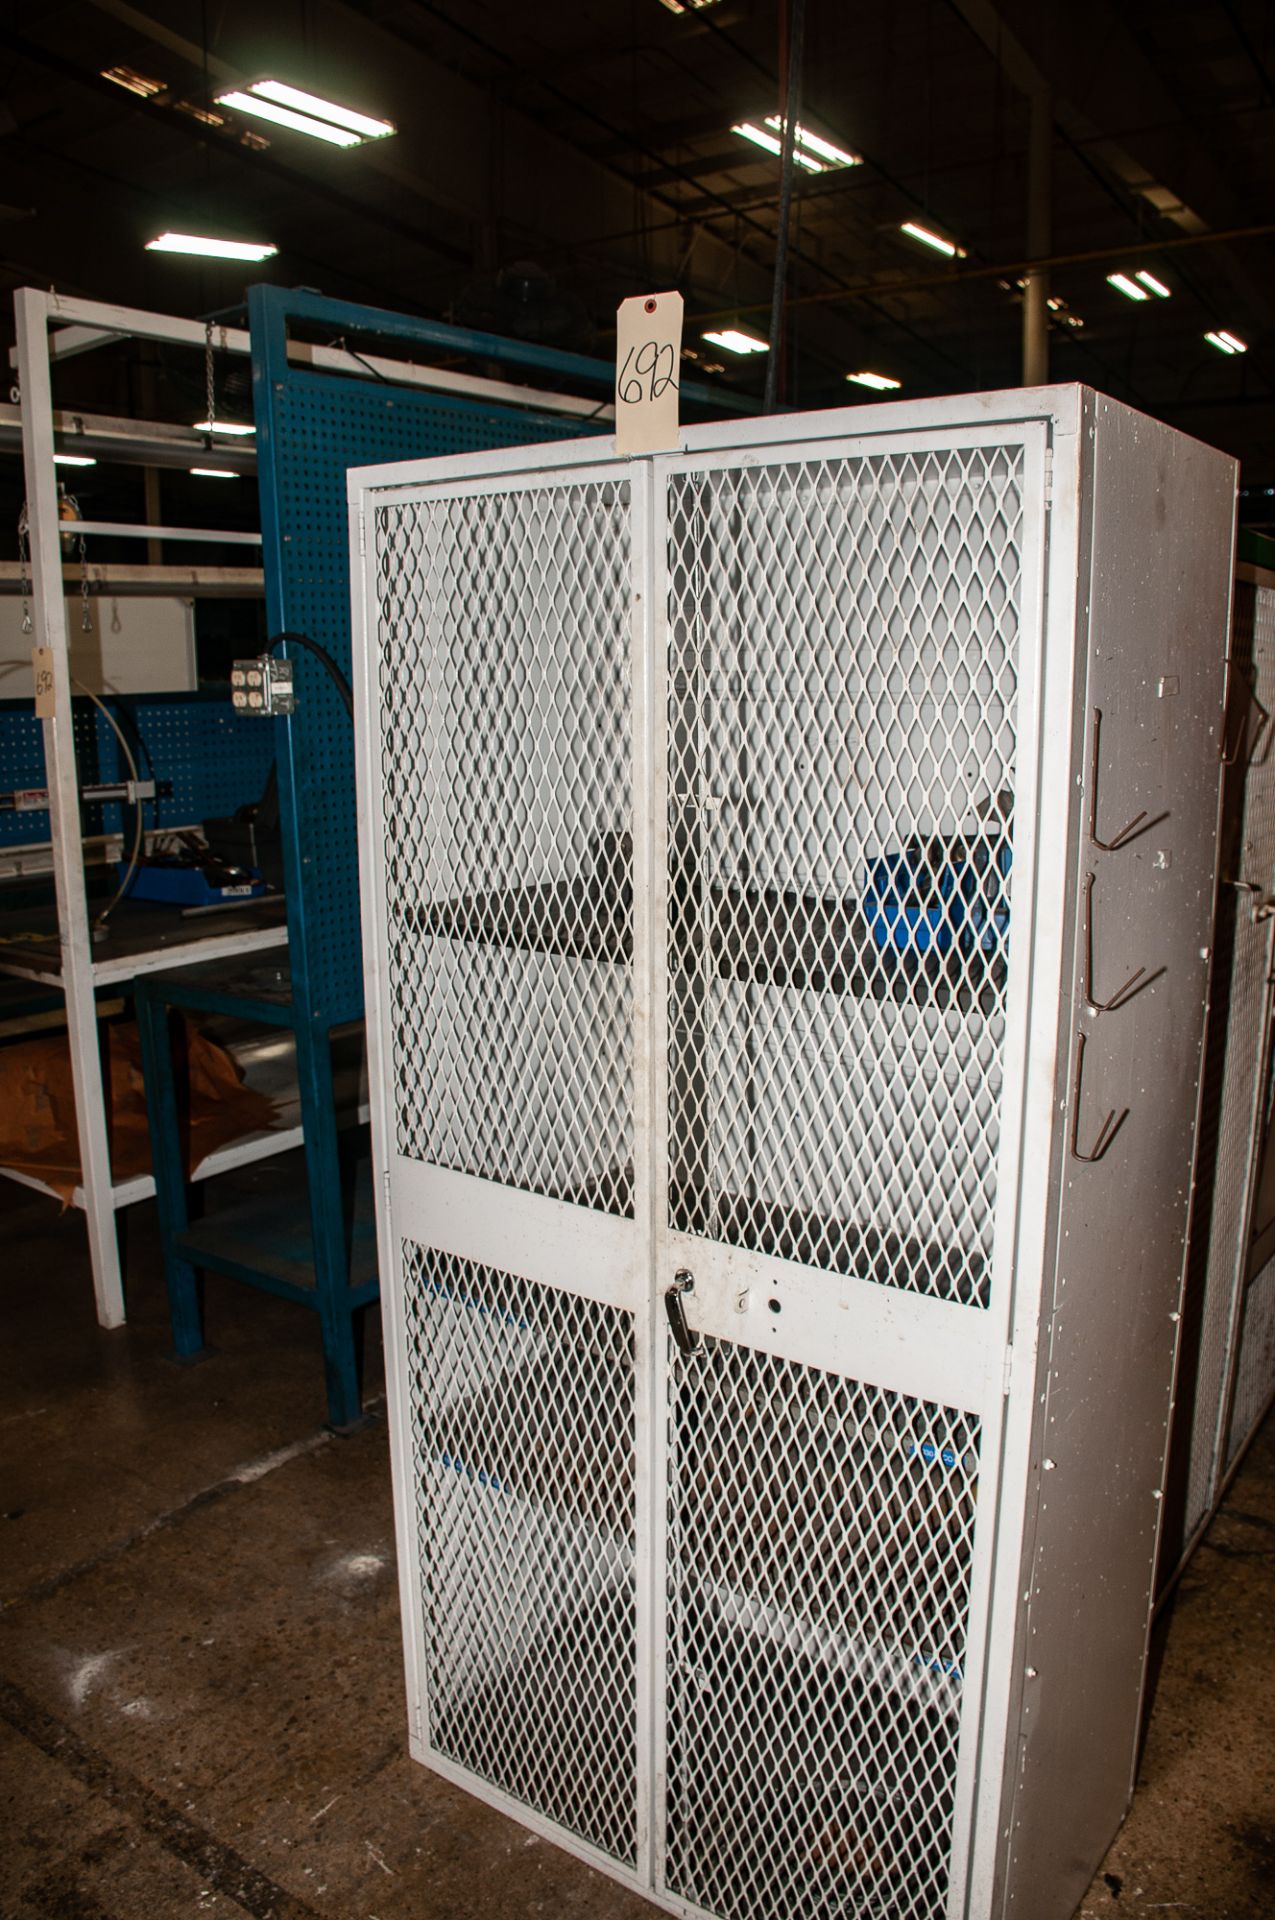 Various Workbenches, Whiteboard, Carts, Mini Safe - Light curtains, Fans, etc. See Photos - Image 10 of 16